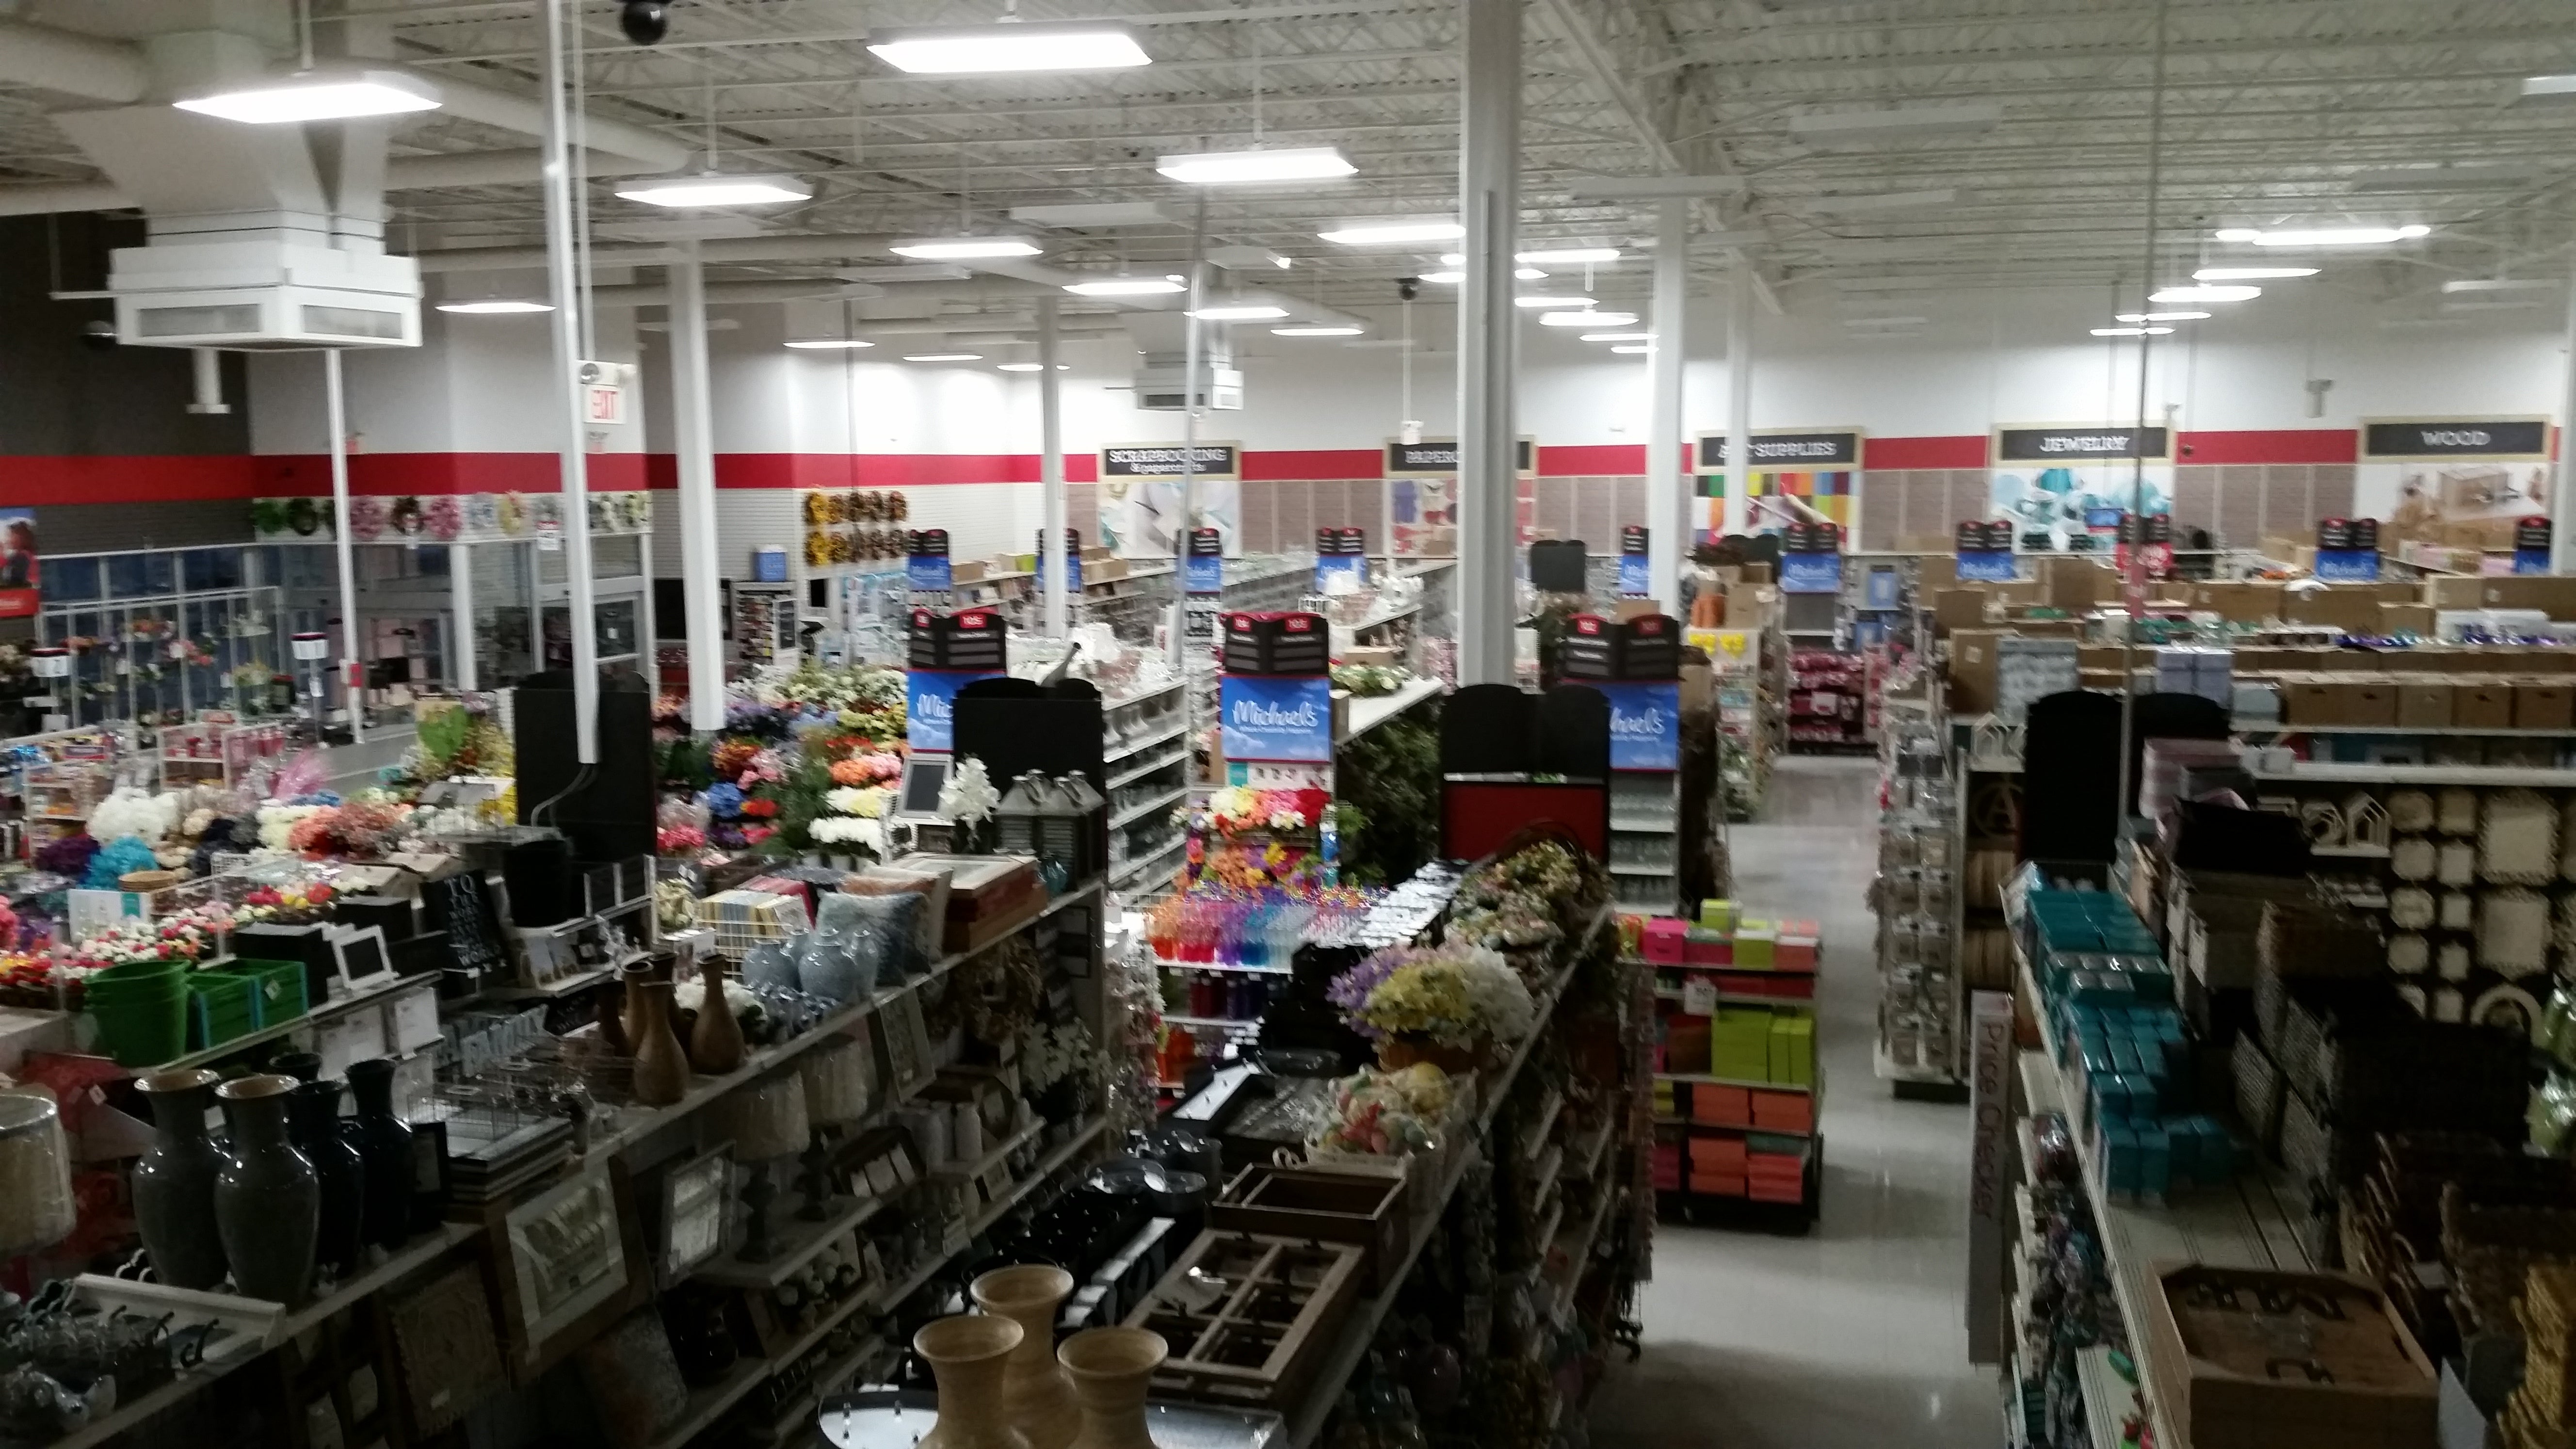 Michaels, 3415 Simpson Ferry Rd, Suite 1, Camp Hill, PA, Arts and crafts  supplies - MapQuest